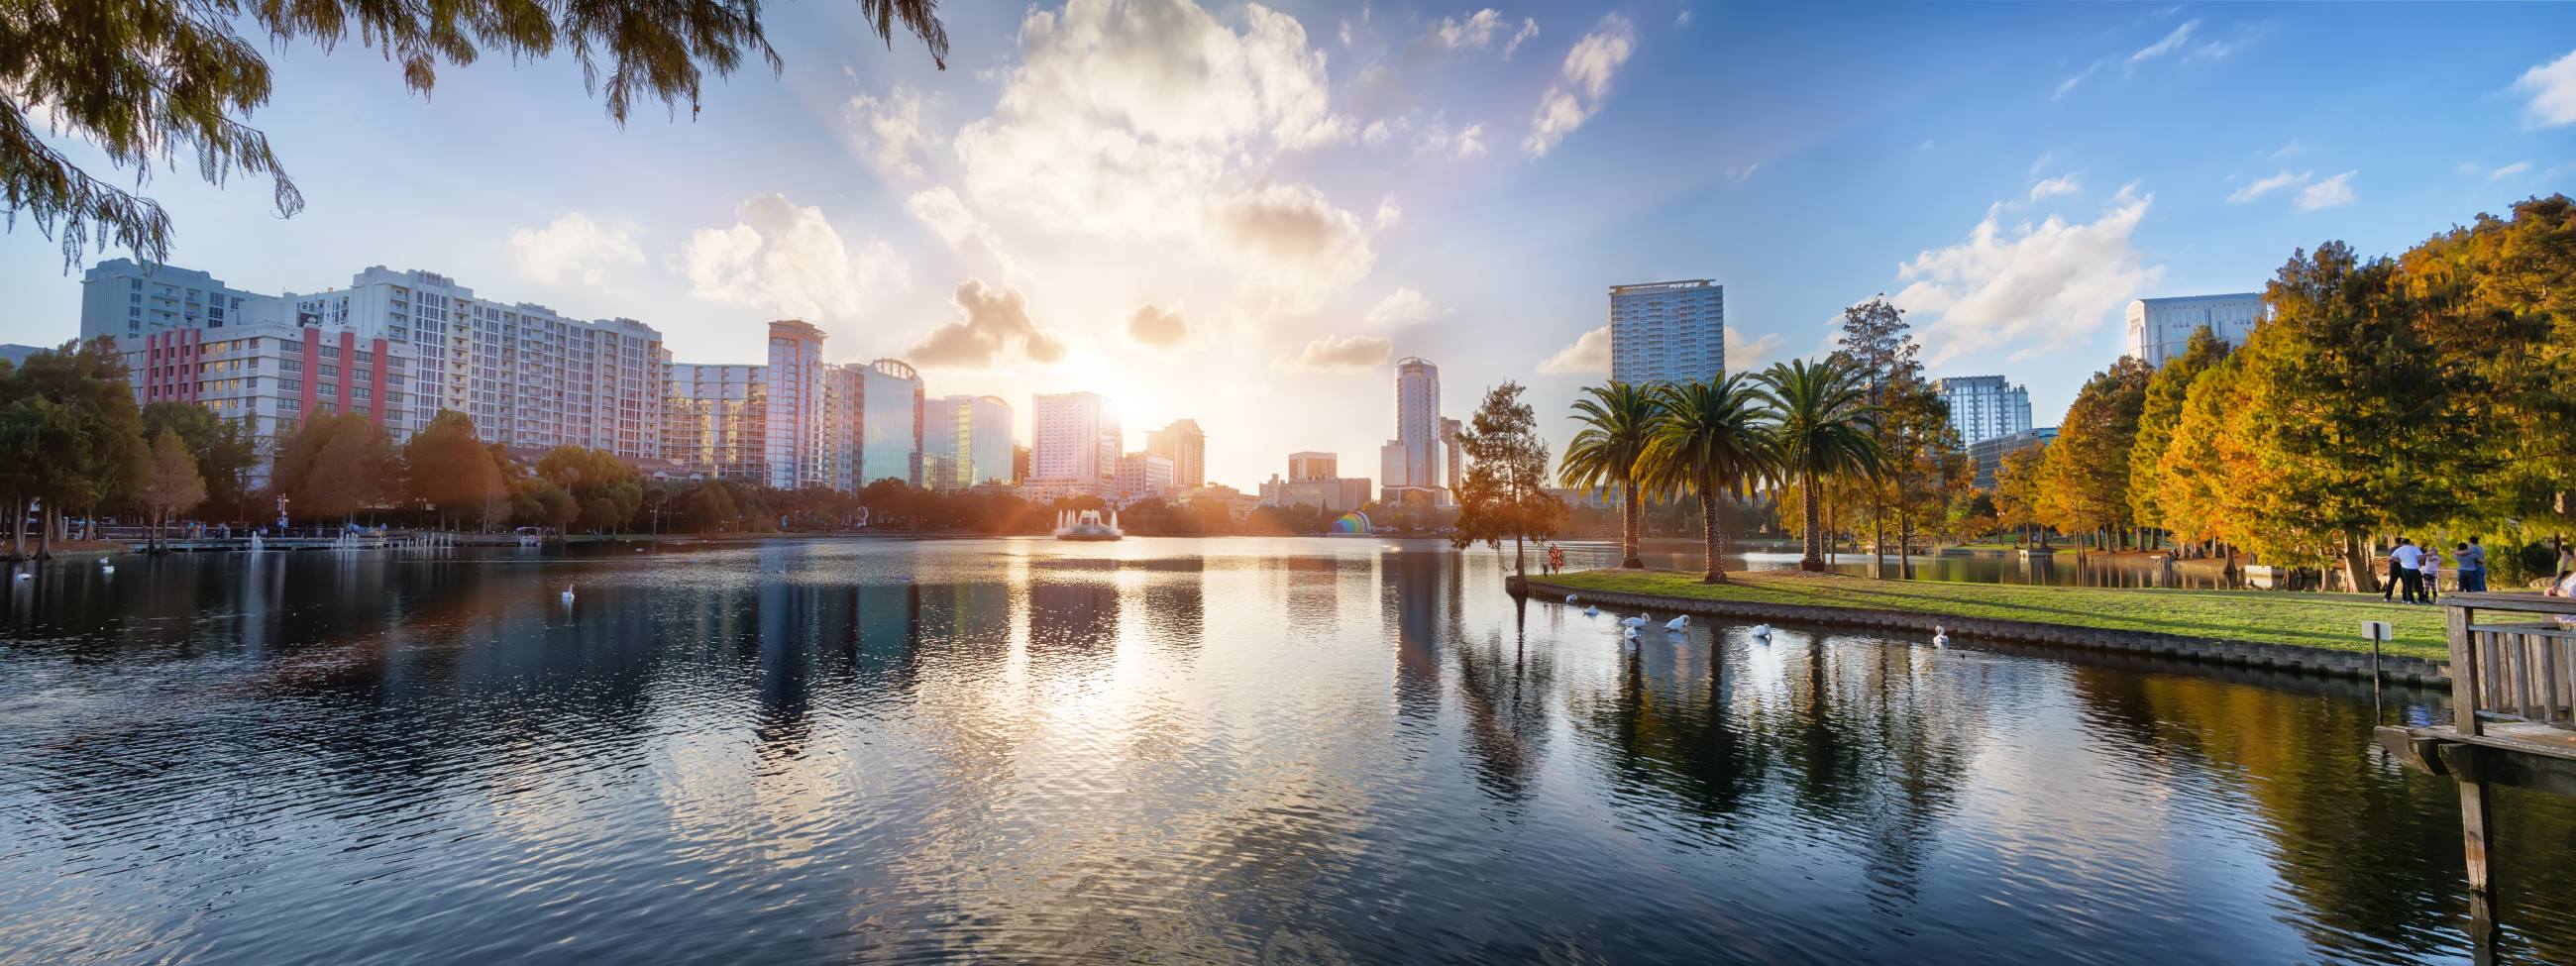 10-Most-Instagrammable-Spots-In-Orlando